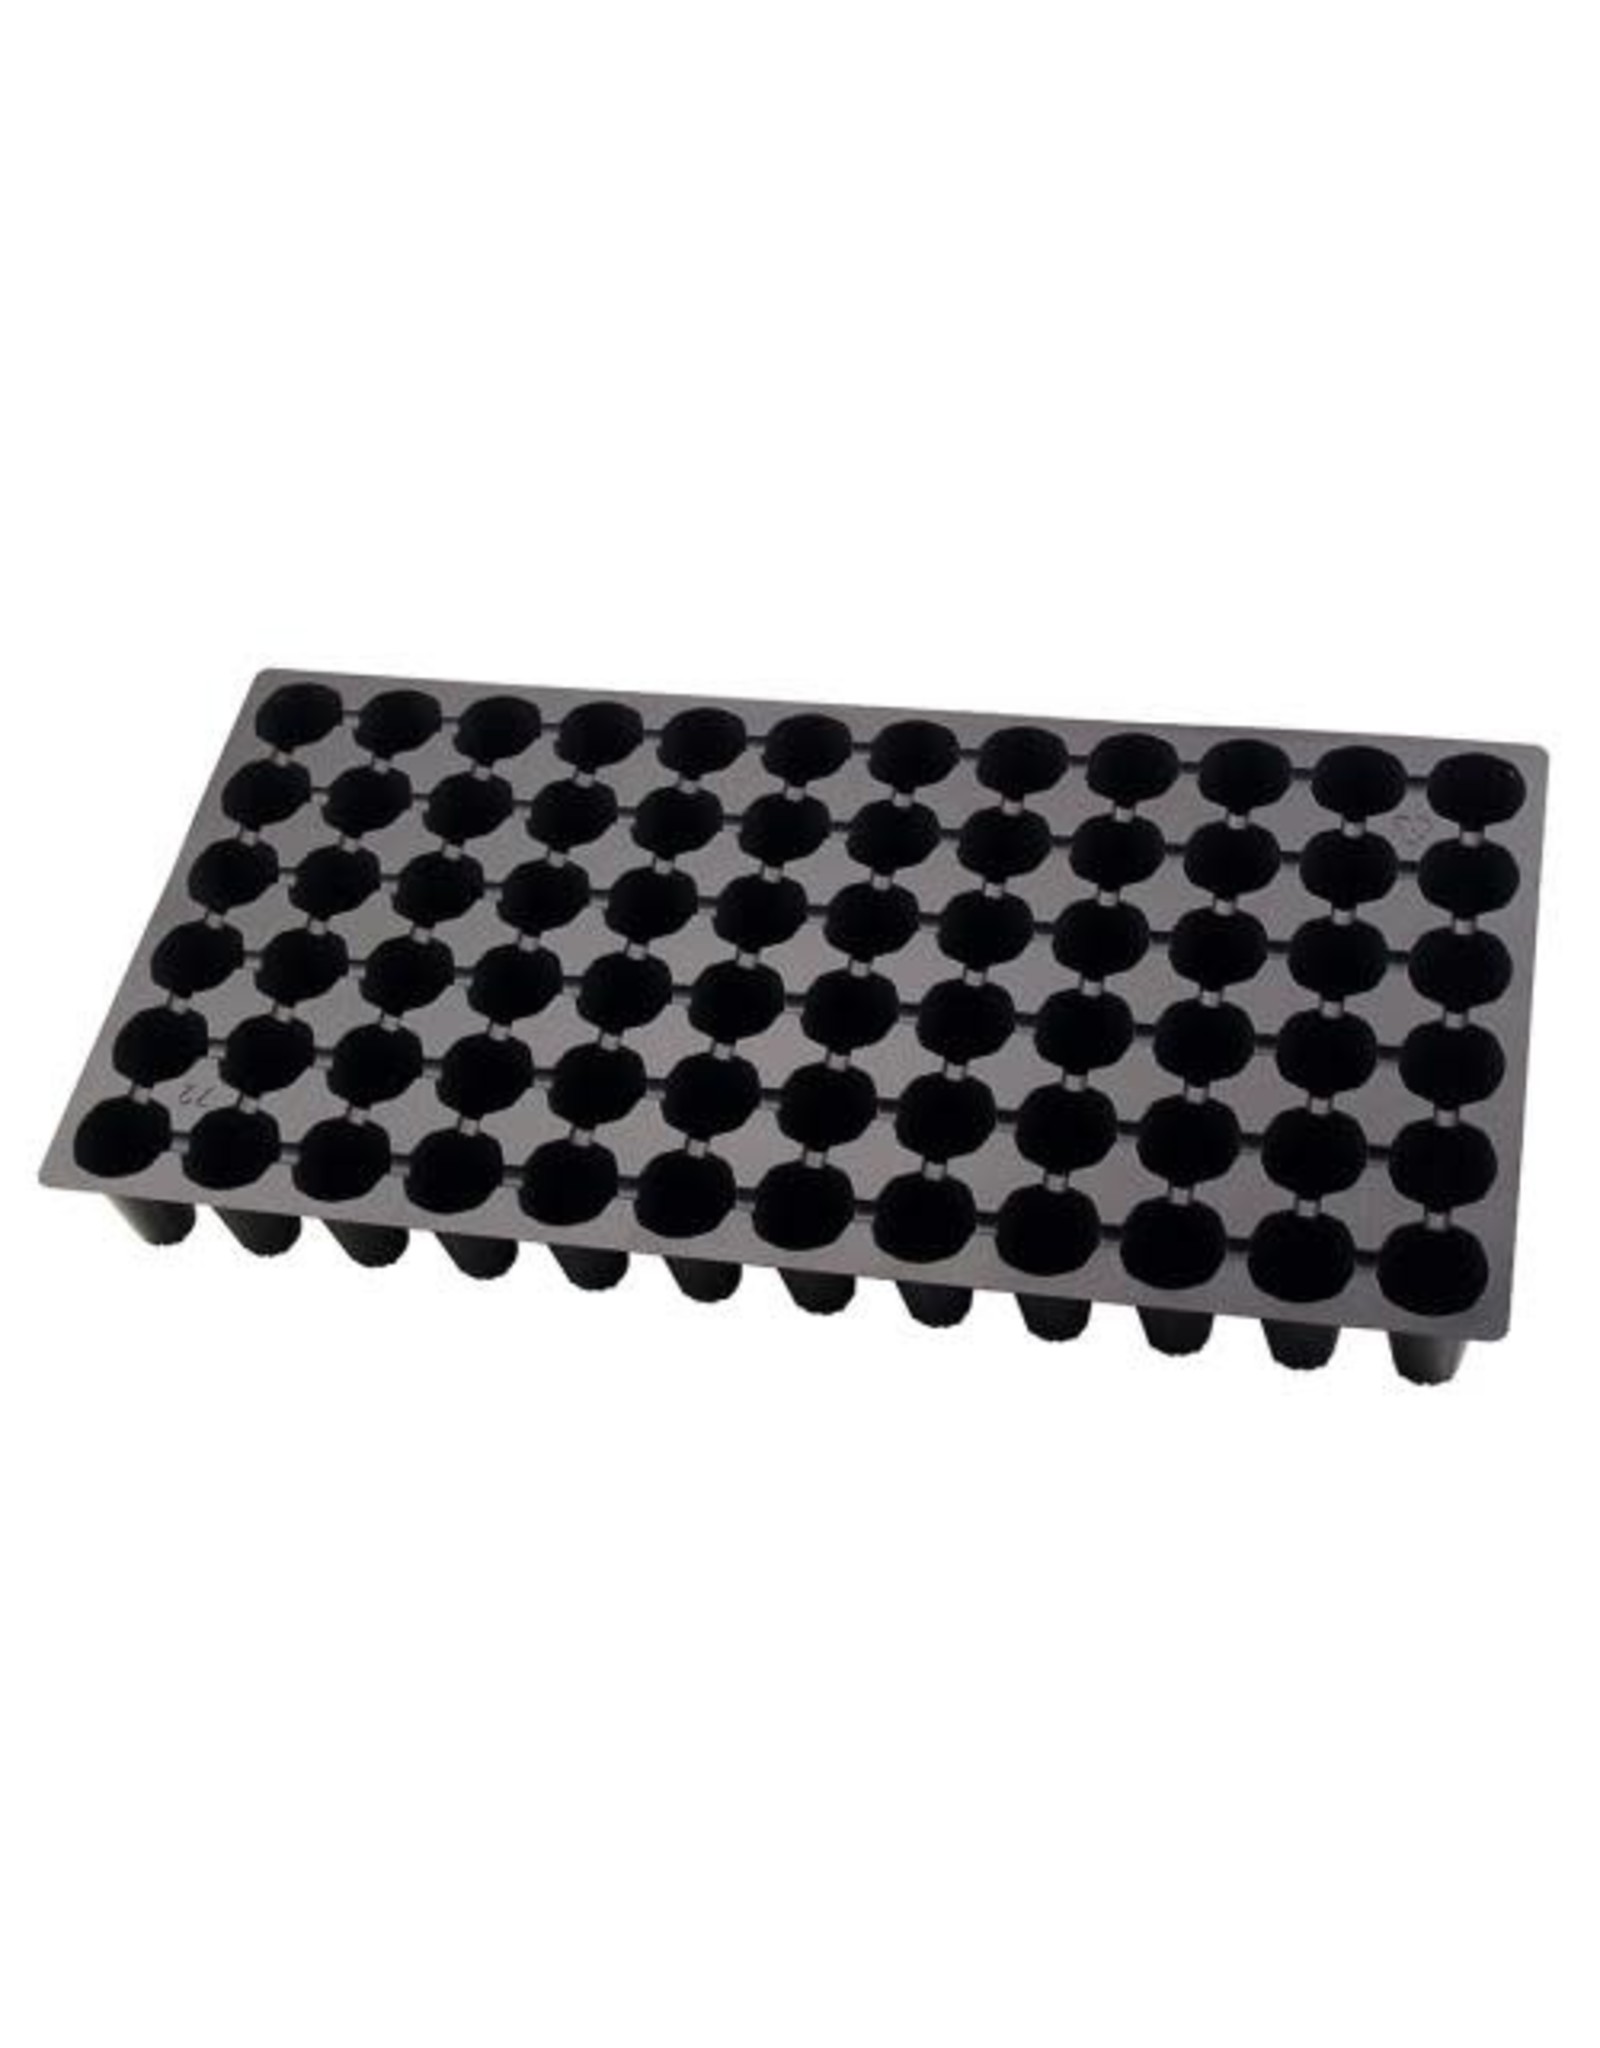 Super Sprouter Super Sprouter 72 Cell Germination Insert Tray - Round Holes